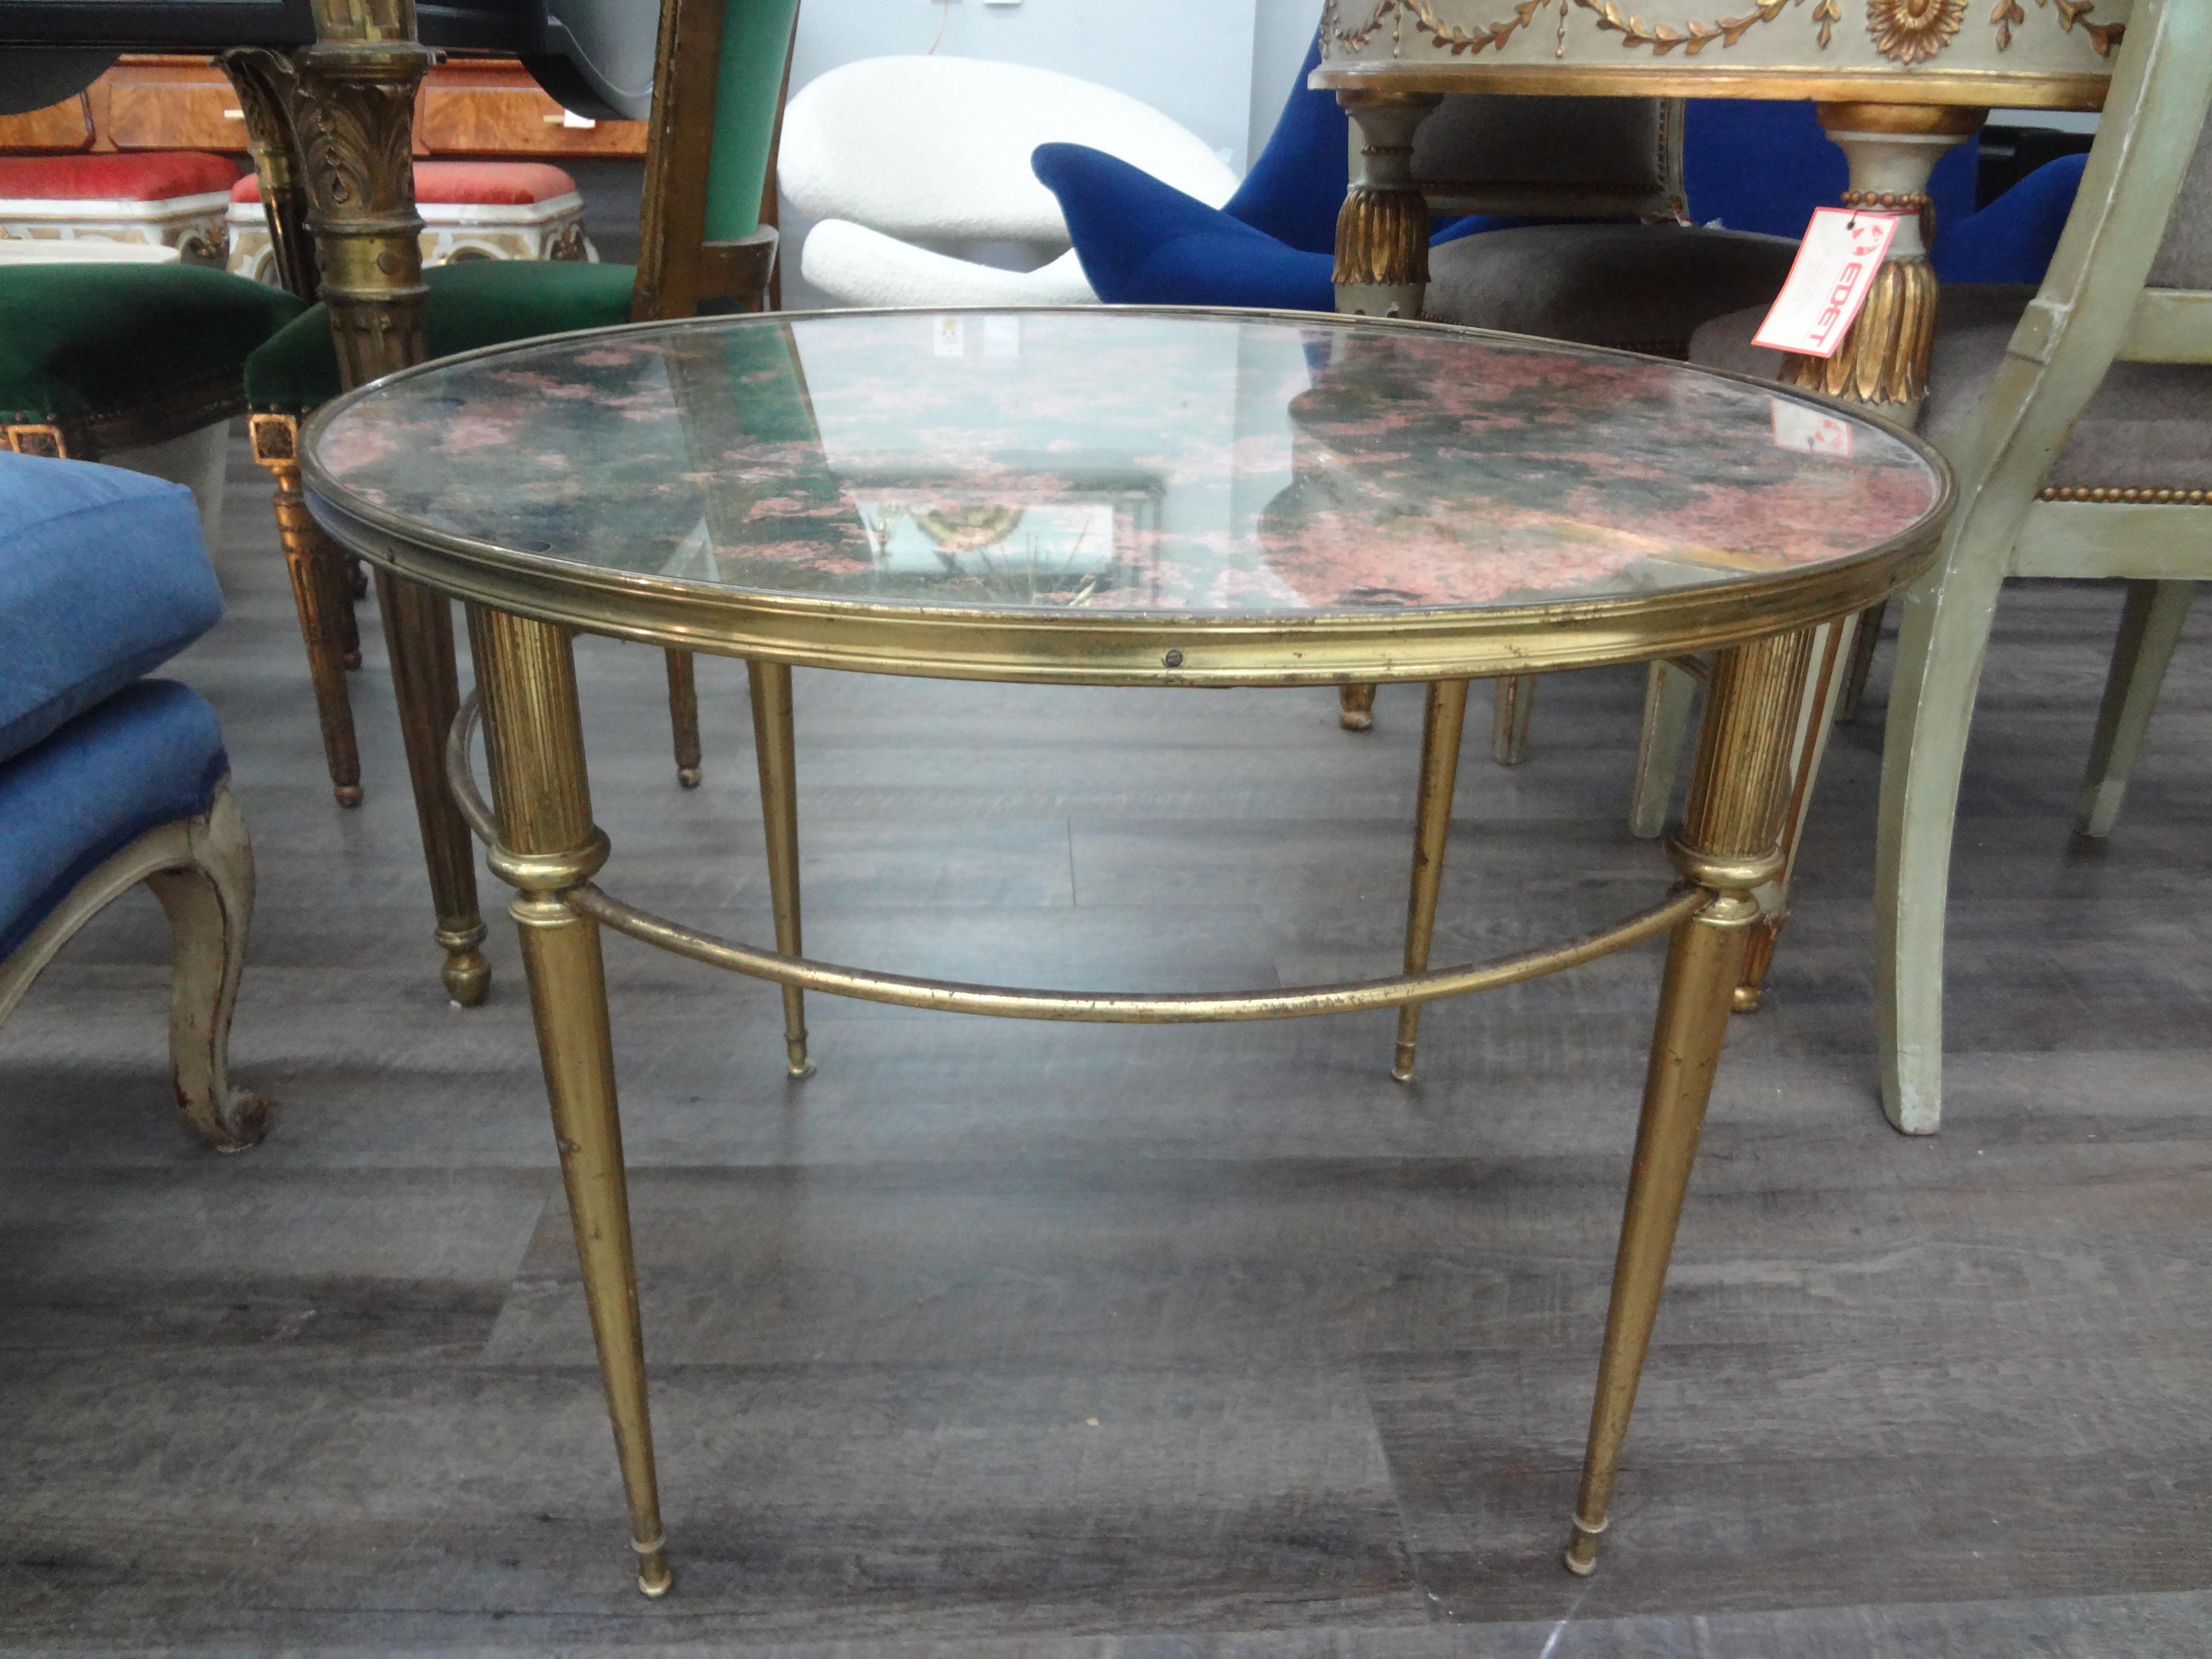 French Maison Bagues Louis XVI Style Coffee Table
This stunning round French Baguès style coffee table or cocktail table has the most unusual eglomise glass top. This French Louis XVI style table could also be used as a side table or tea